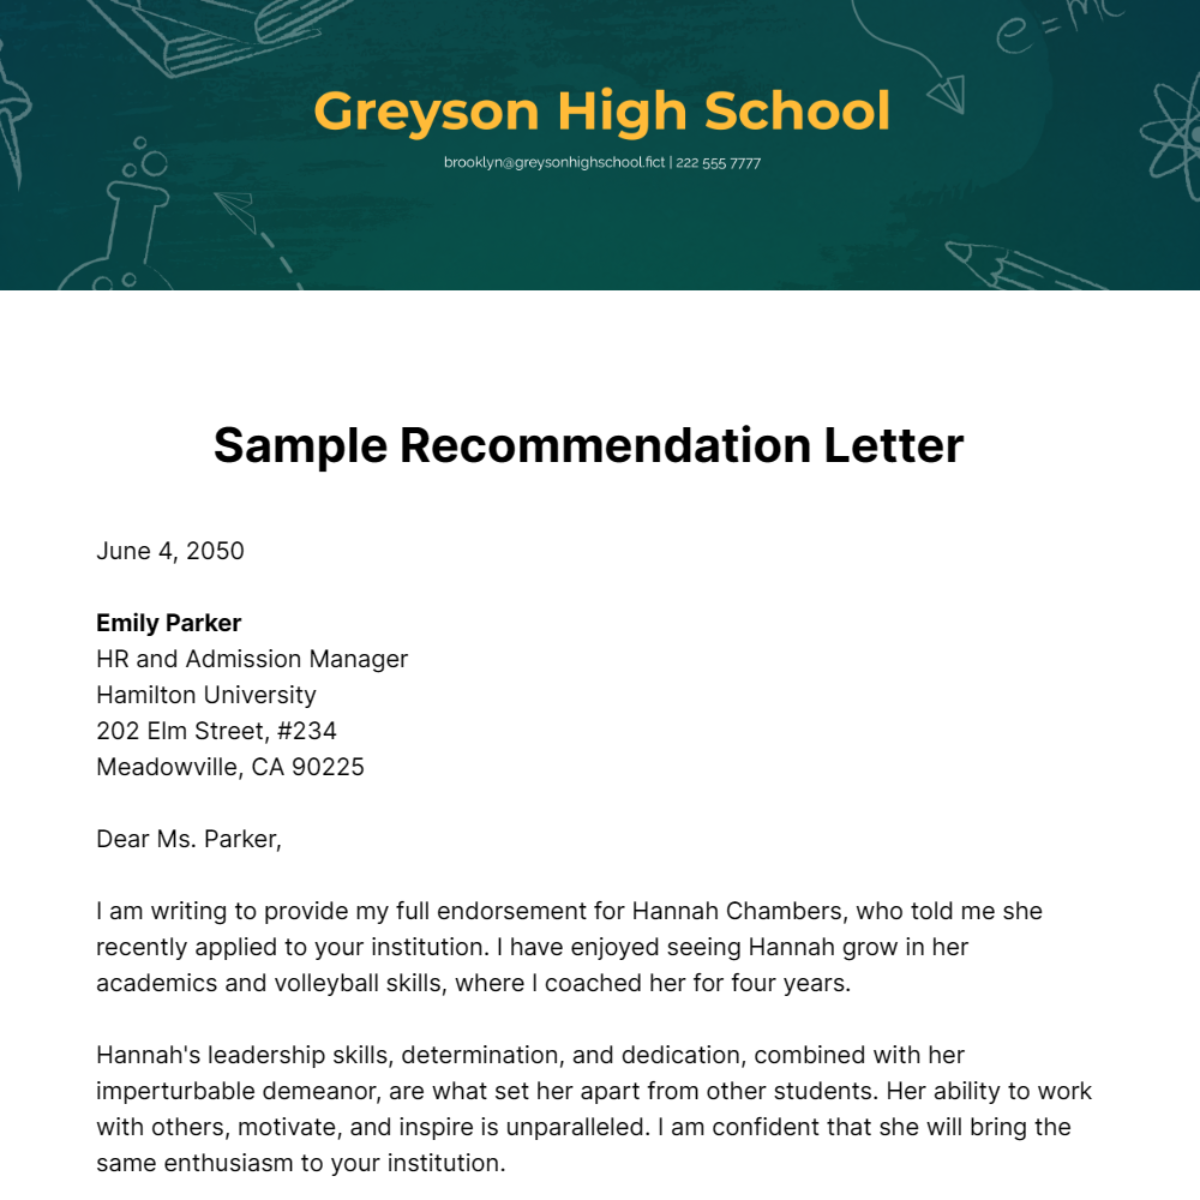 Sample Recommendation Letter Template